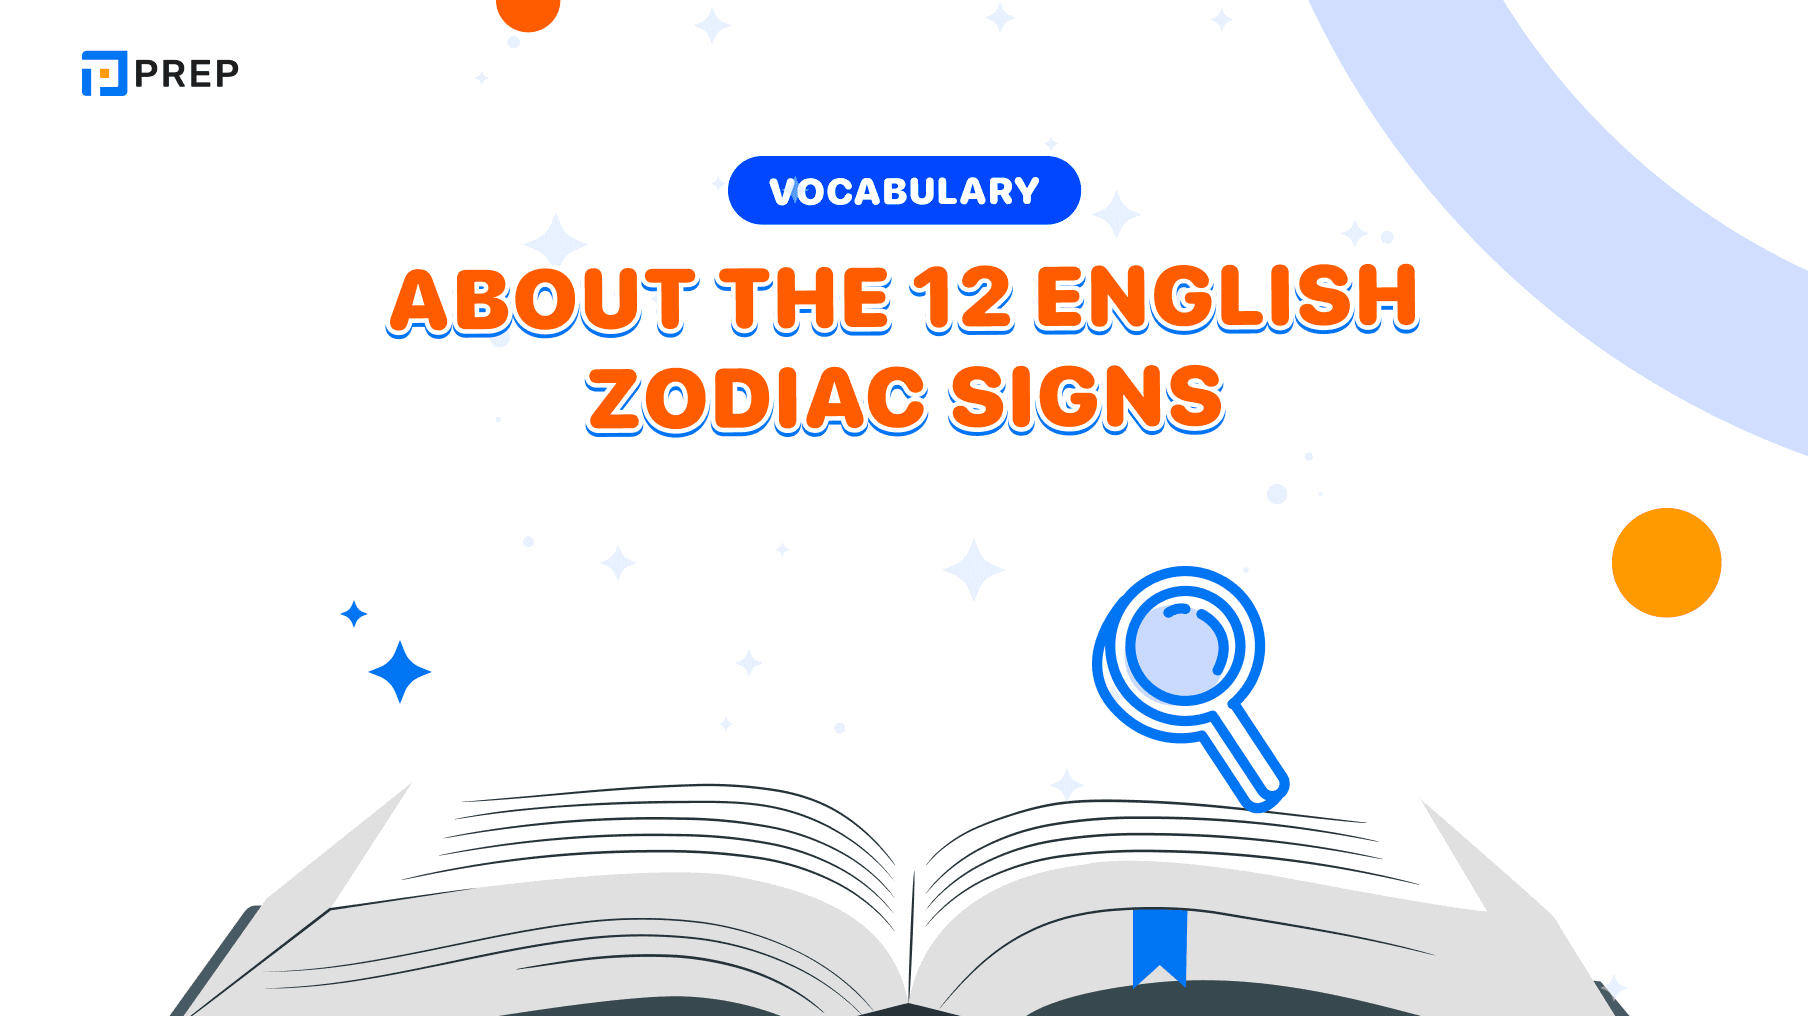 Vocabulary about the 12 English zodiac signs